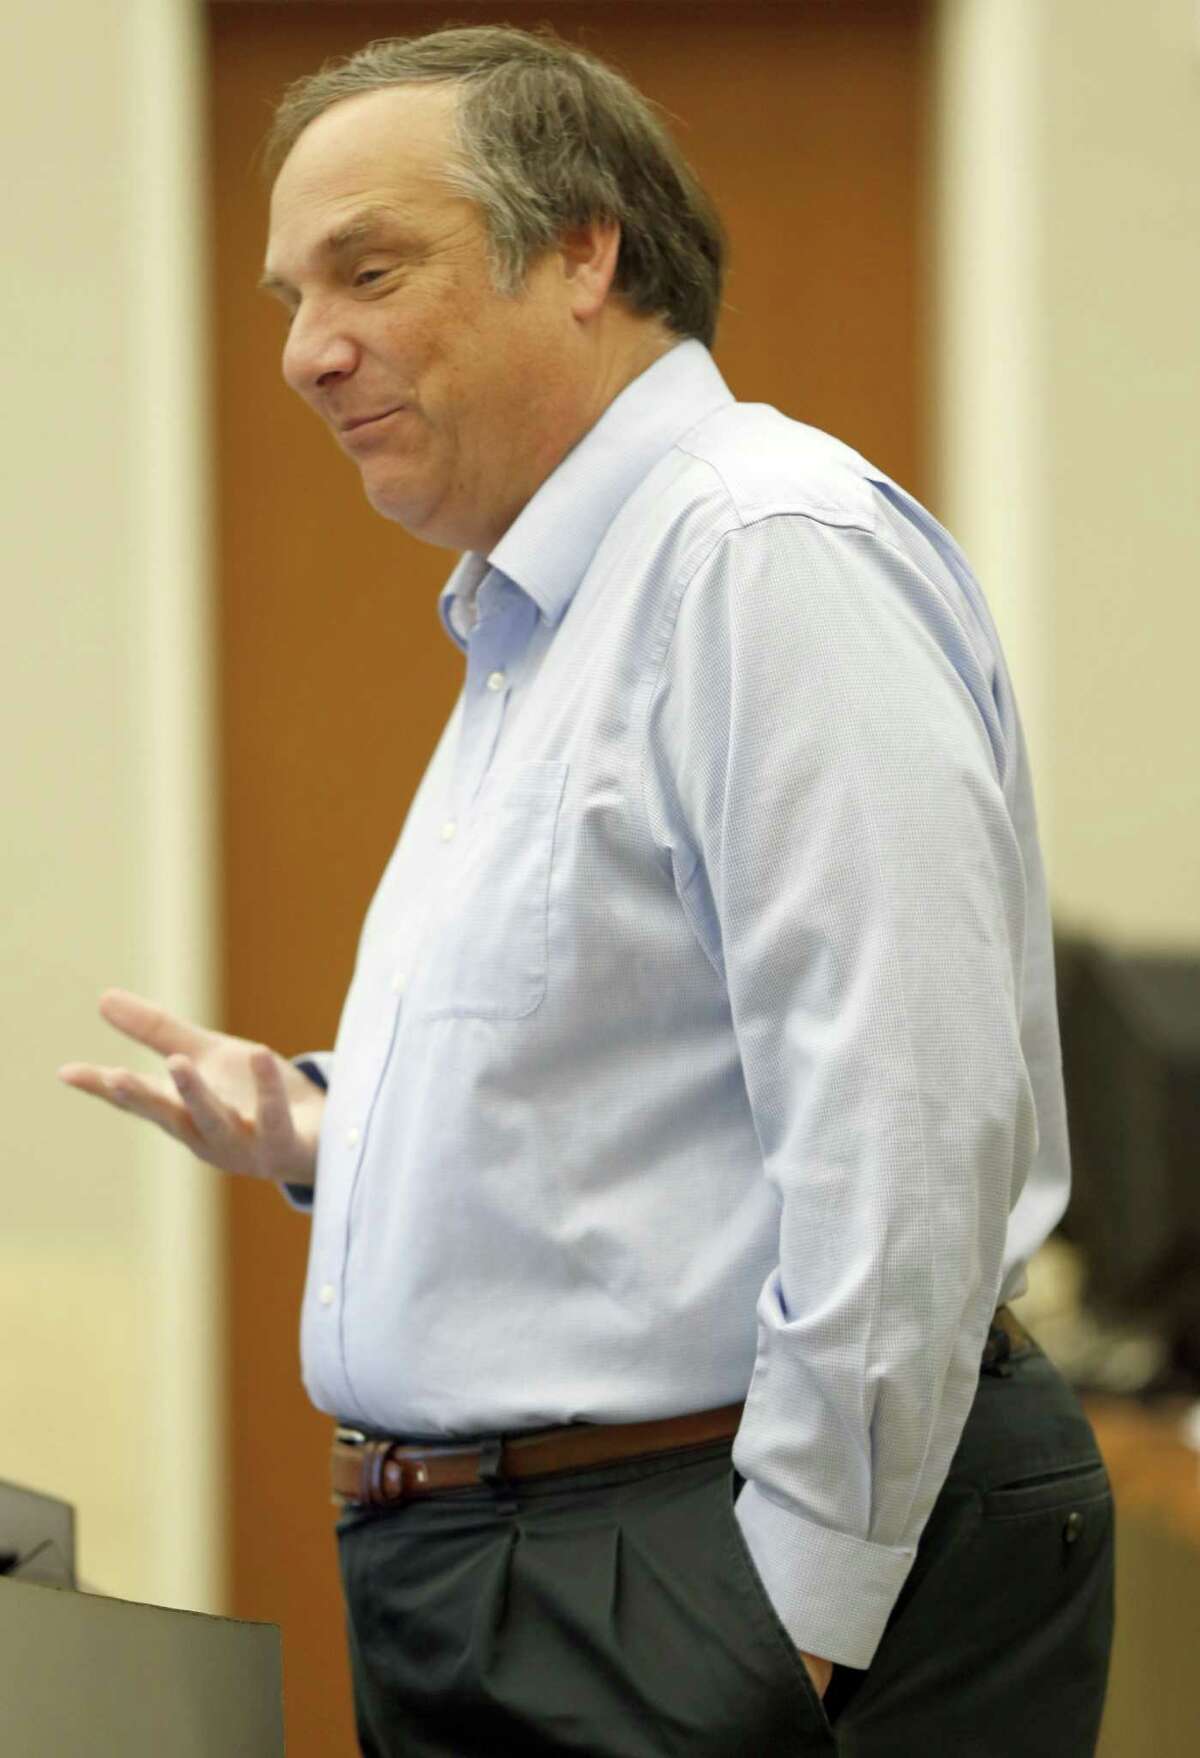 State Climatologist John Nielsen-Gammon addresses the Edwards Aquifer Authority board during a meeting in San Antonio.